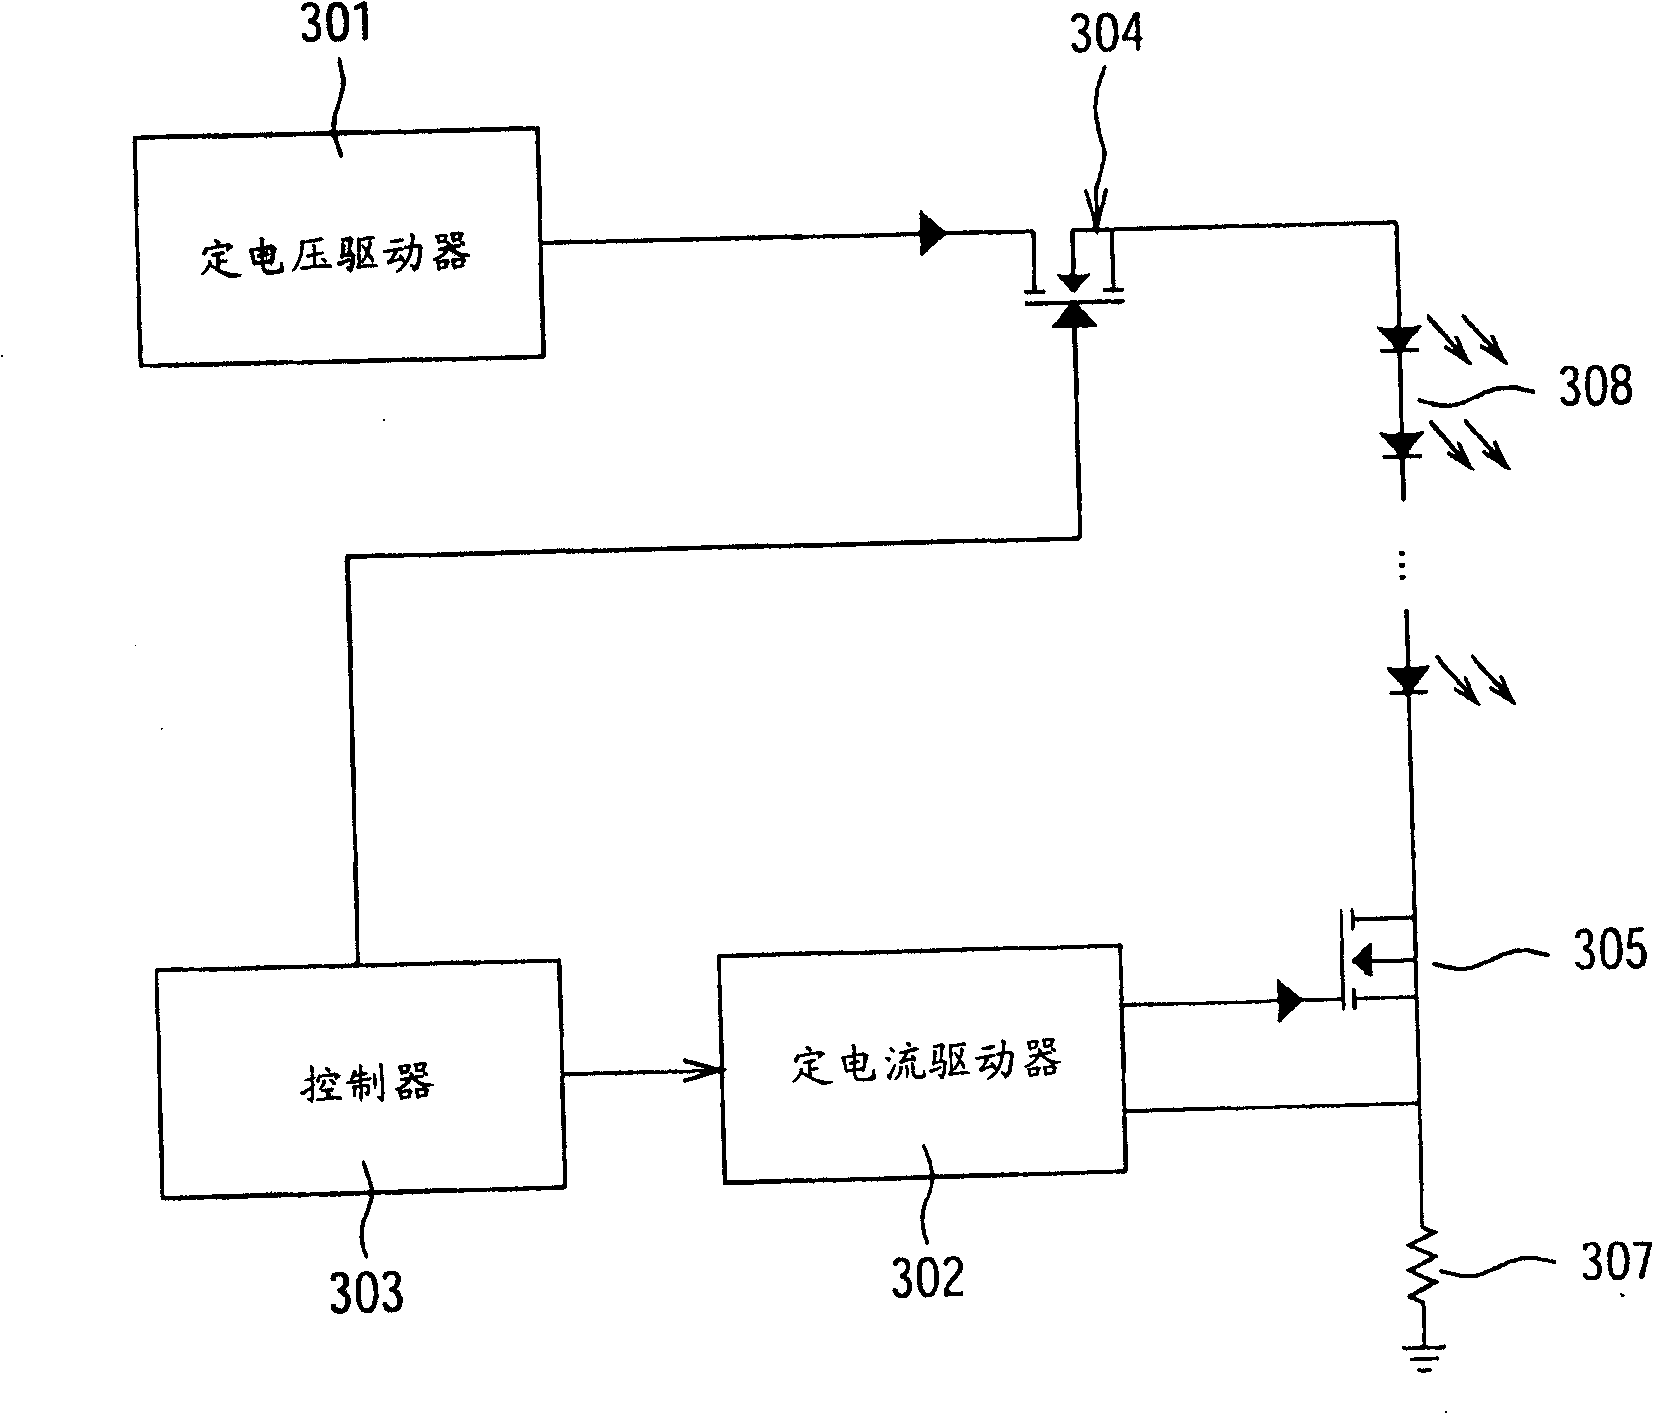 Backlight module with variable lightness and brightness control method